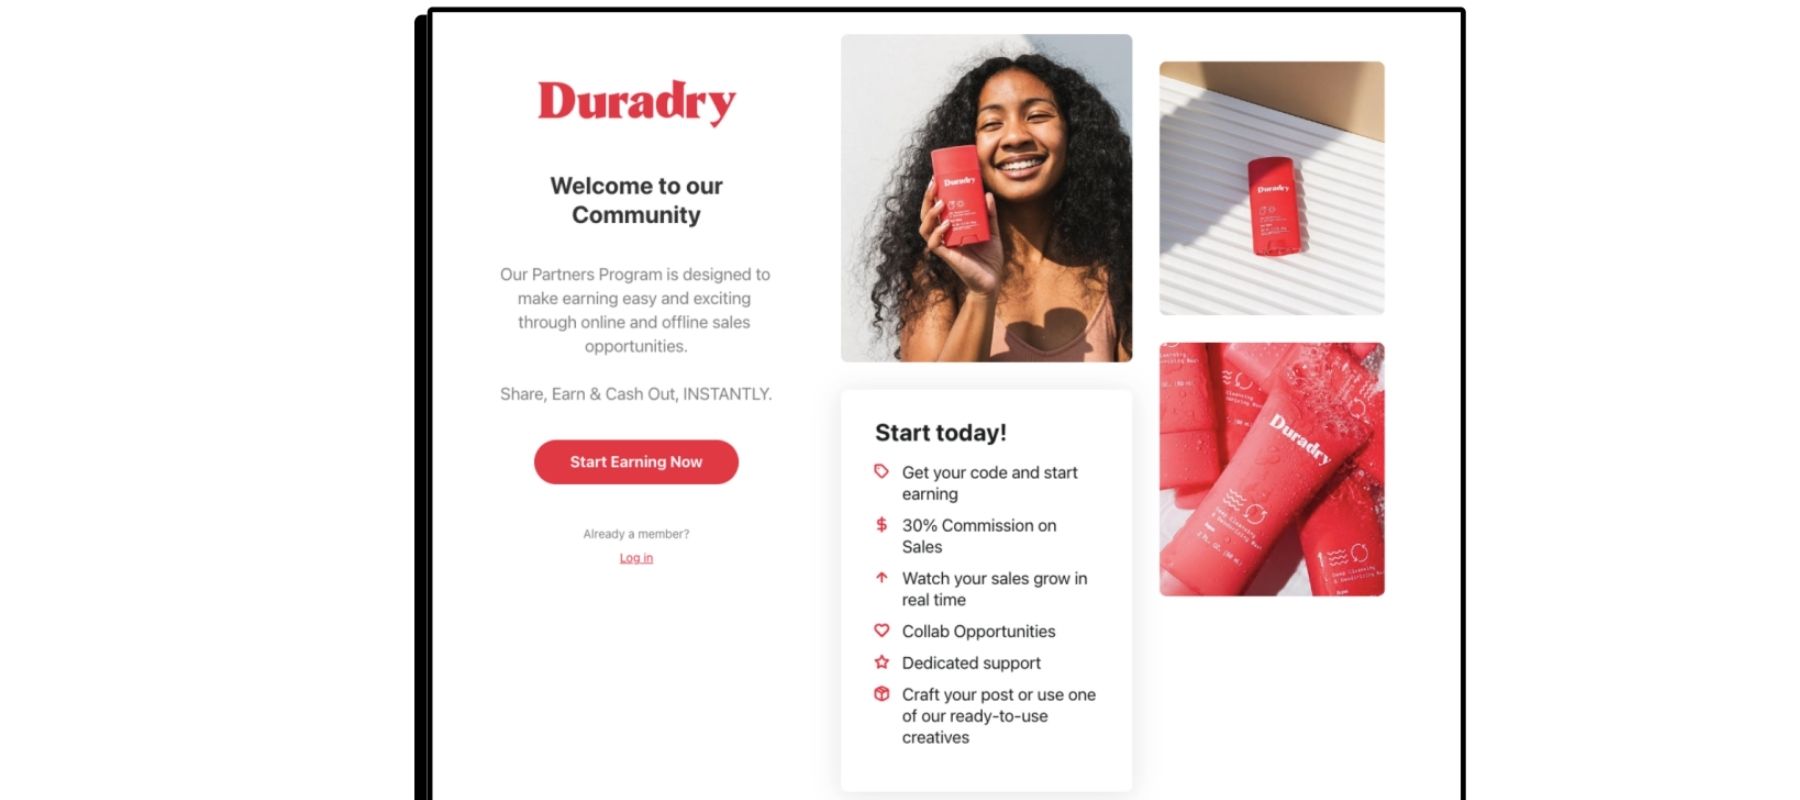 Duradry brand profile on Shopify Collabs.